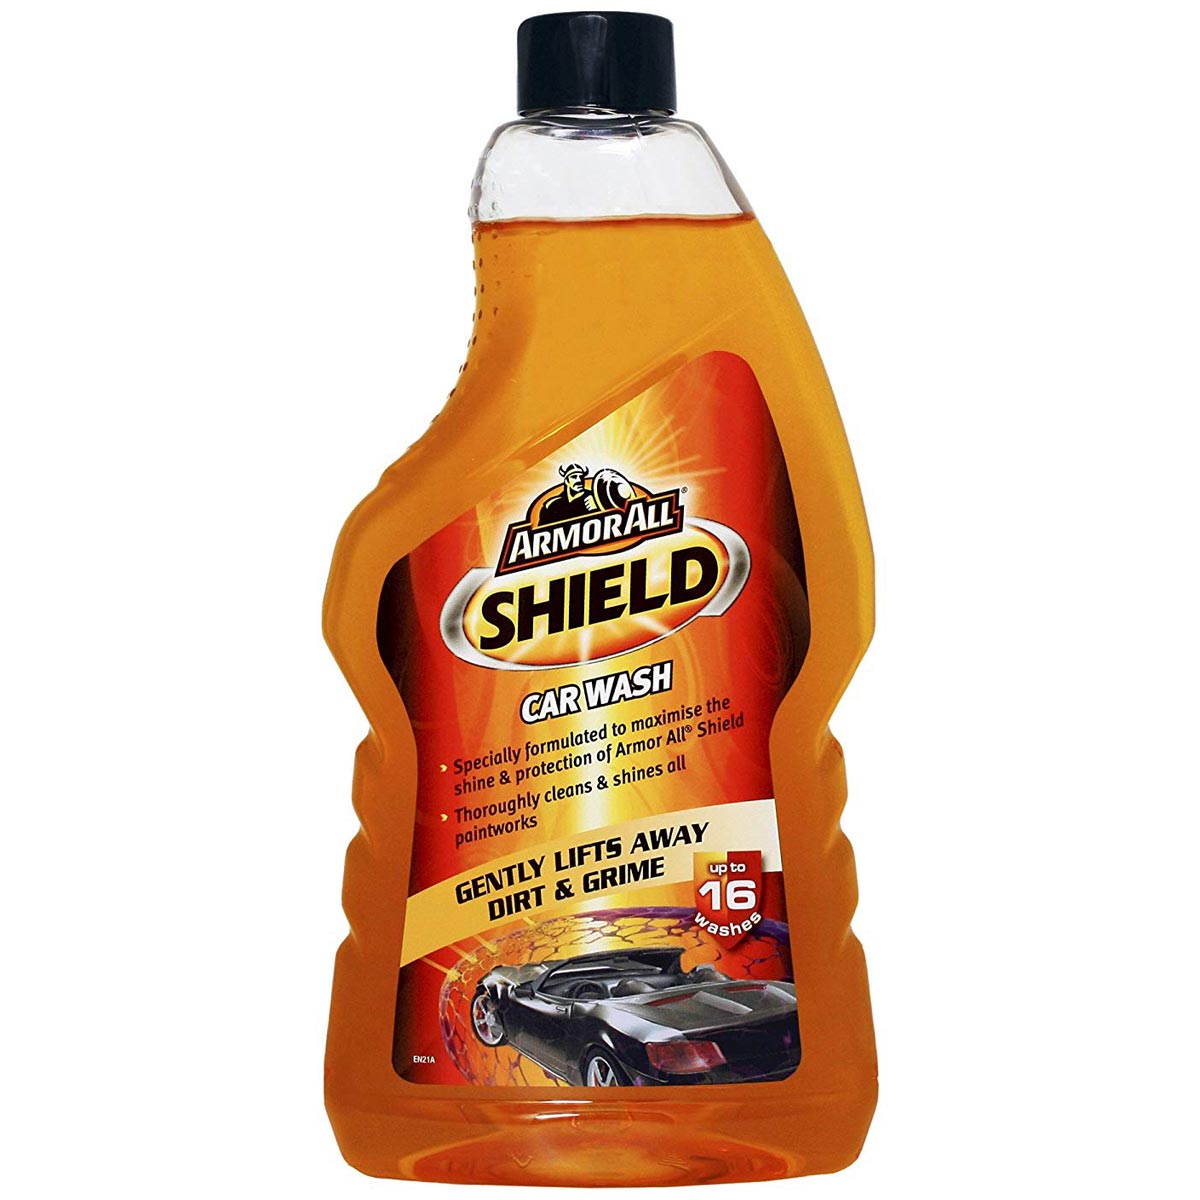 Armor All Shield Car Wash: Clean your car and maintain shine in one!